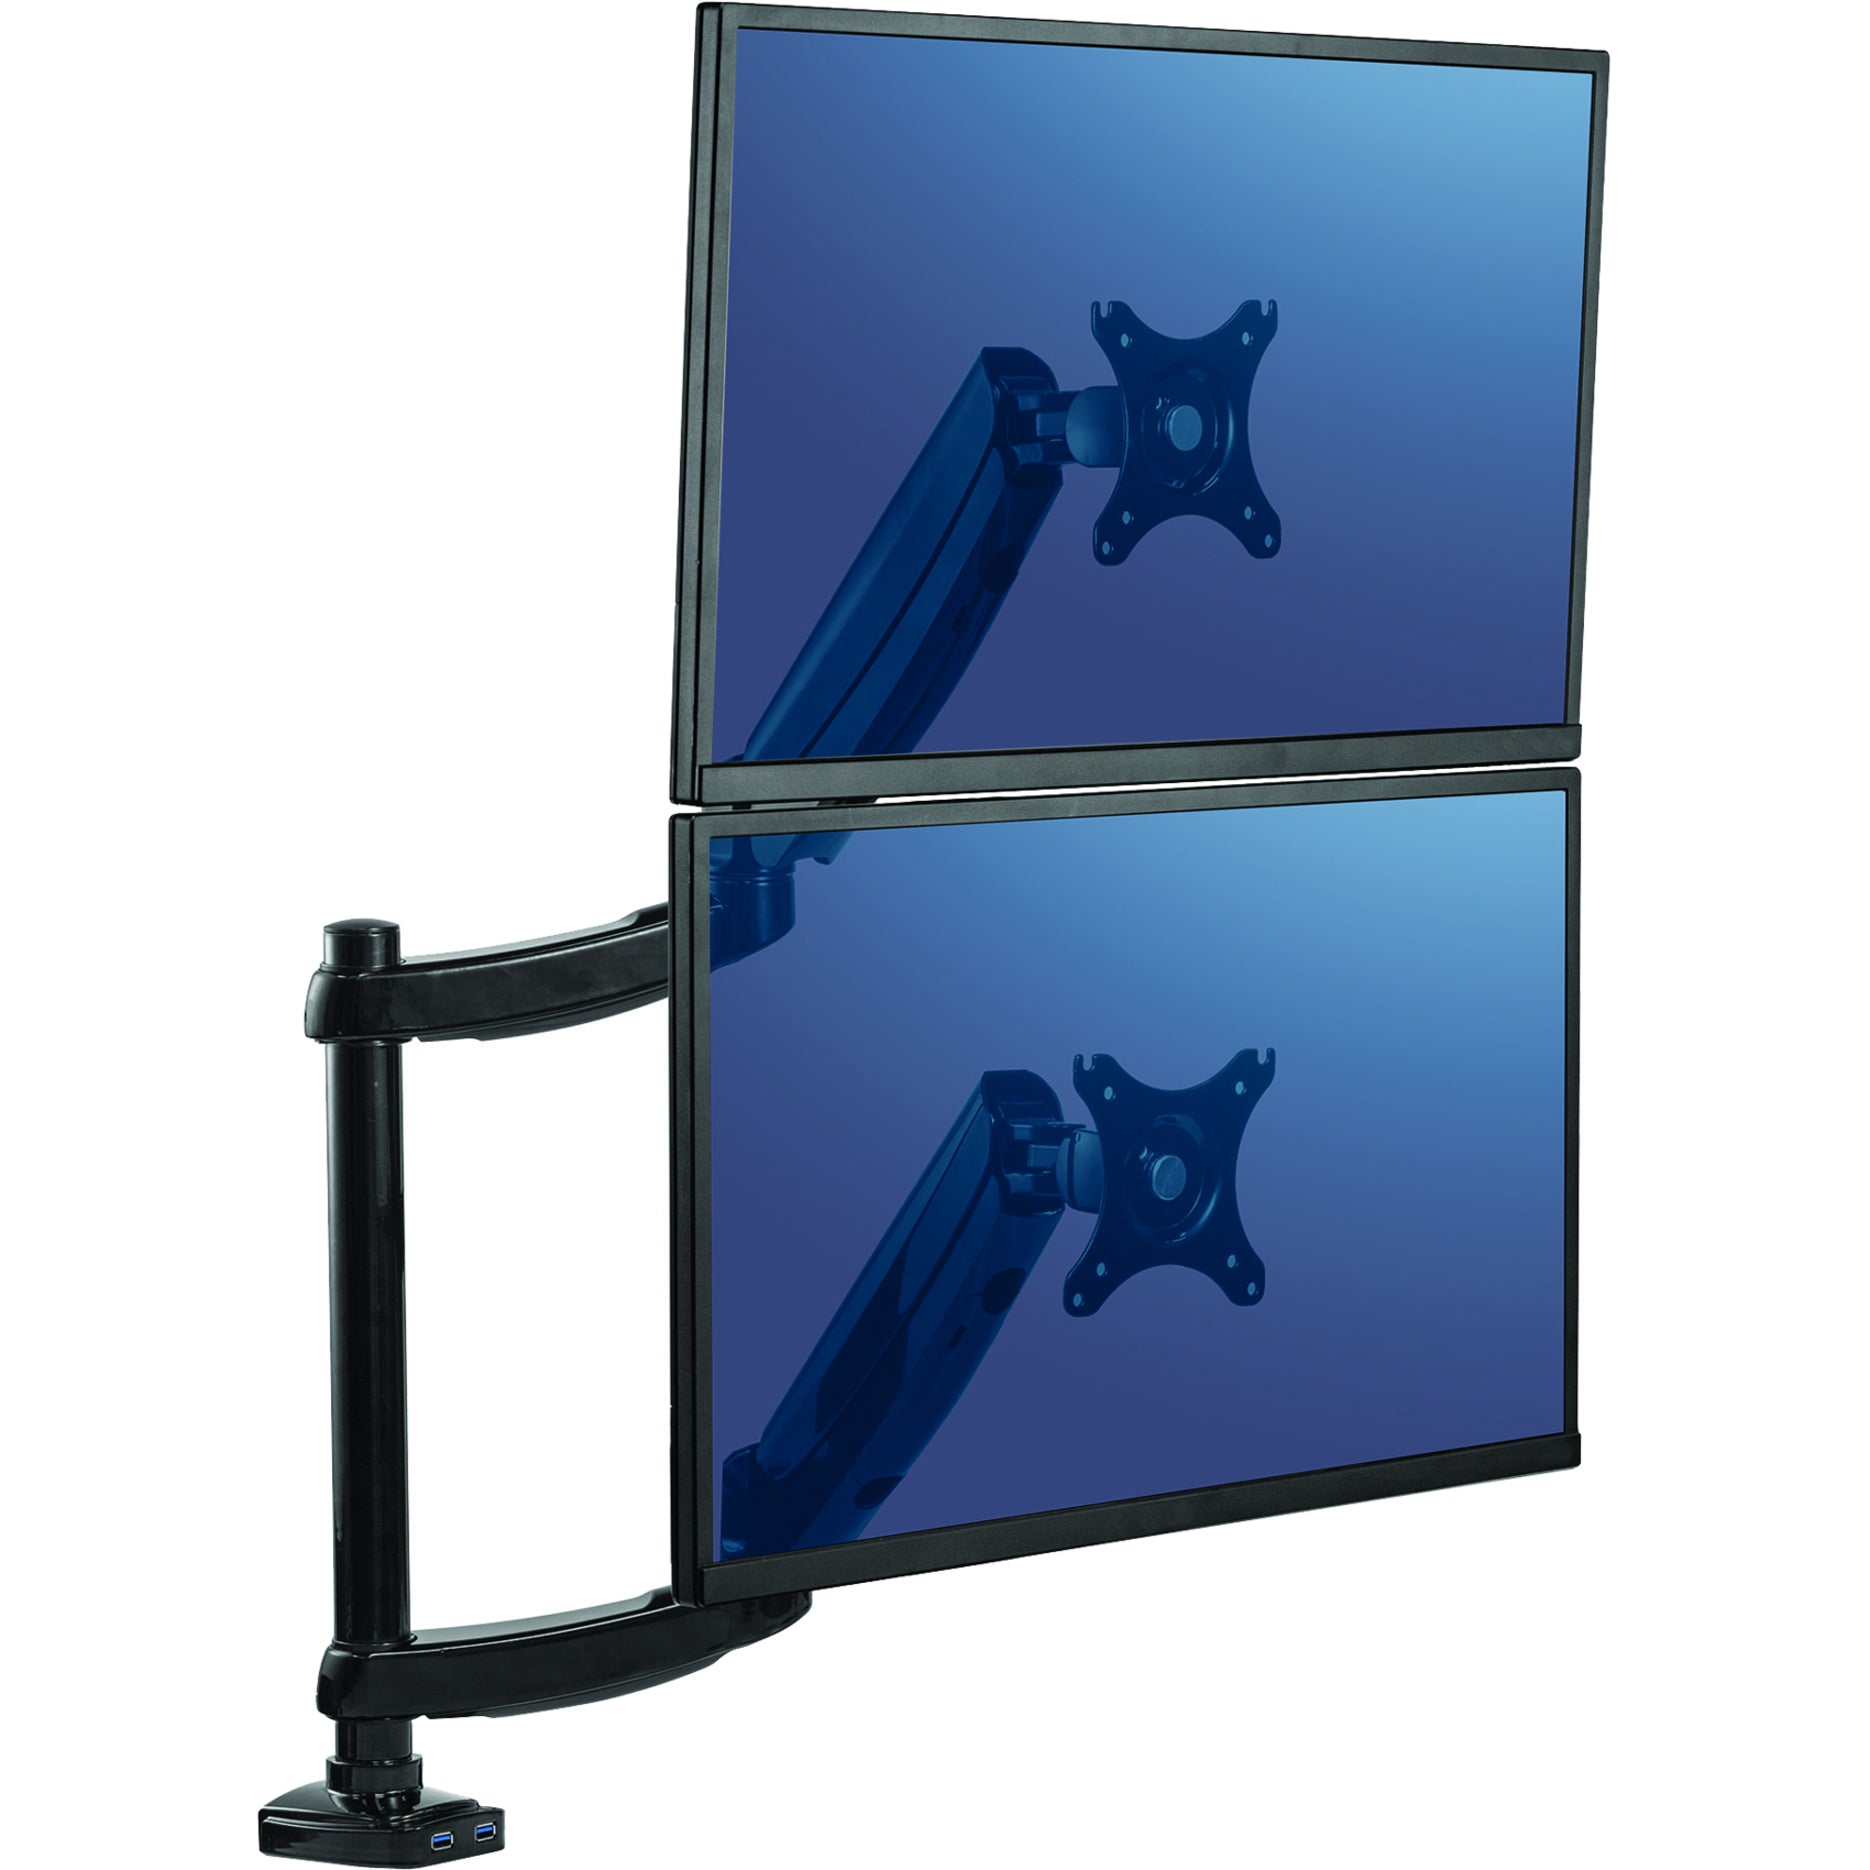 Fellowes 8043401 Platinum Series Dual Stacking Monitor Arm, Supports 2 Monitors up to 27", 44 lb Capacity